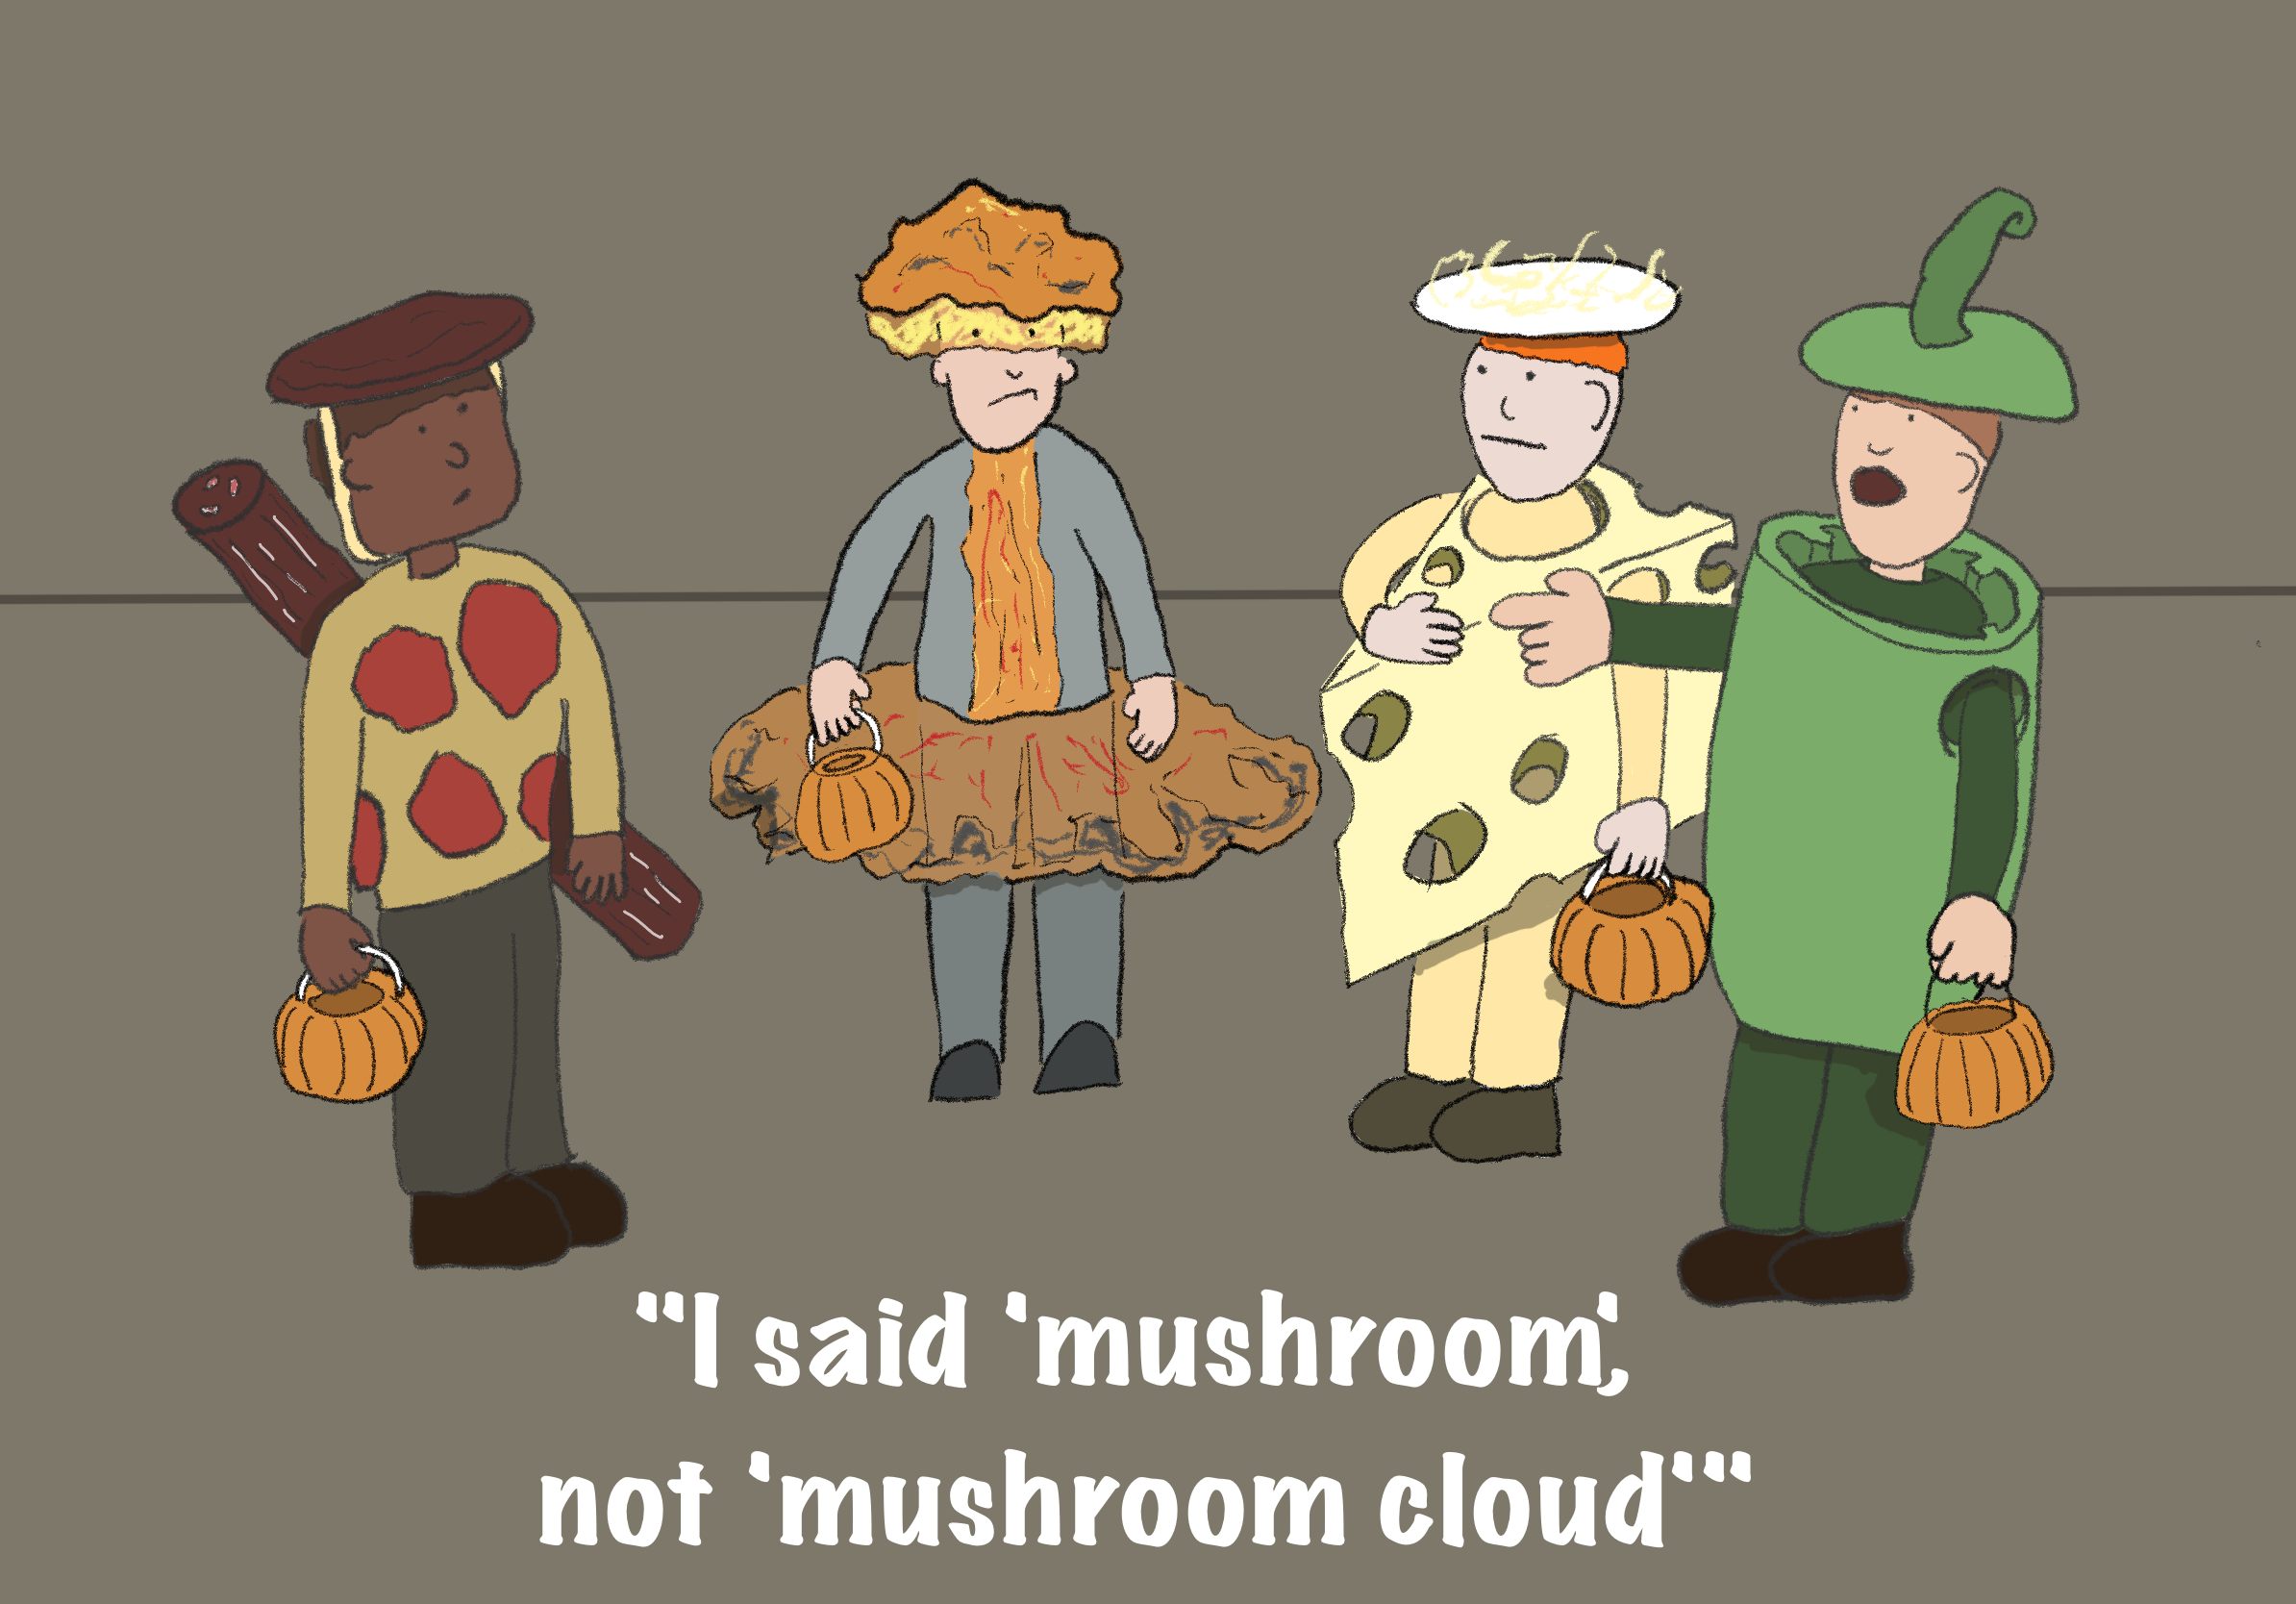 Four kids in halloween costumes. 3 of them are dressed as pizza toppings (pepperoni, cheese, green pepper. The fourth kid is dressed as an atomic mushroom cloud. The green pepper kid is pointing at the odd one out saying "I said 'mushroom', not 'mushroom cloud'")